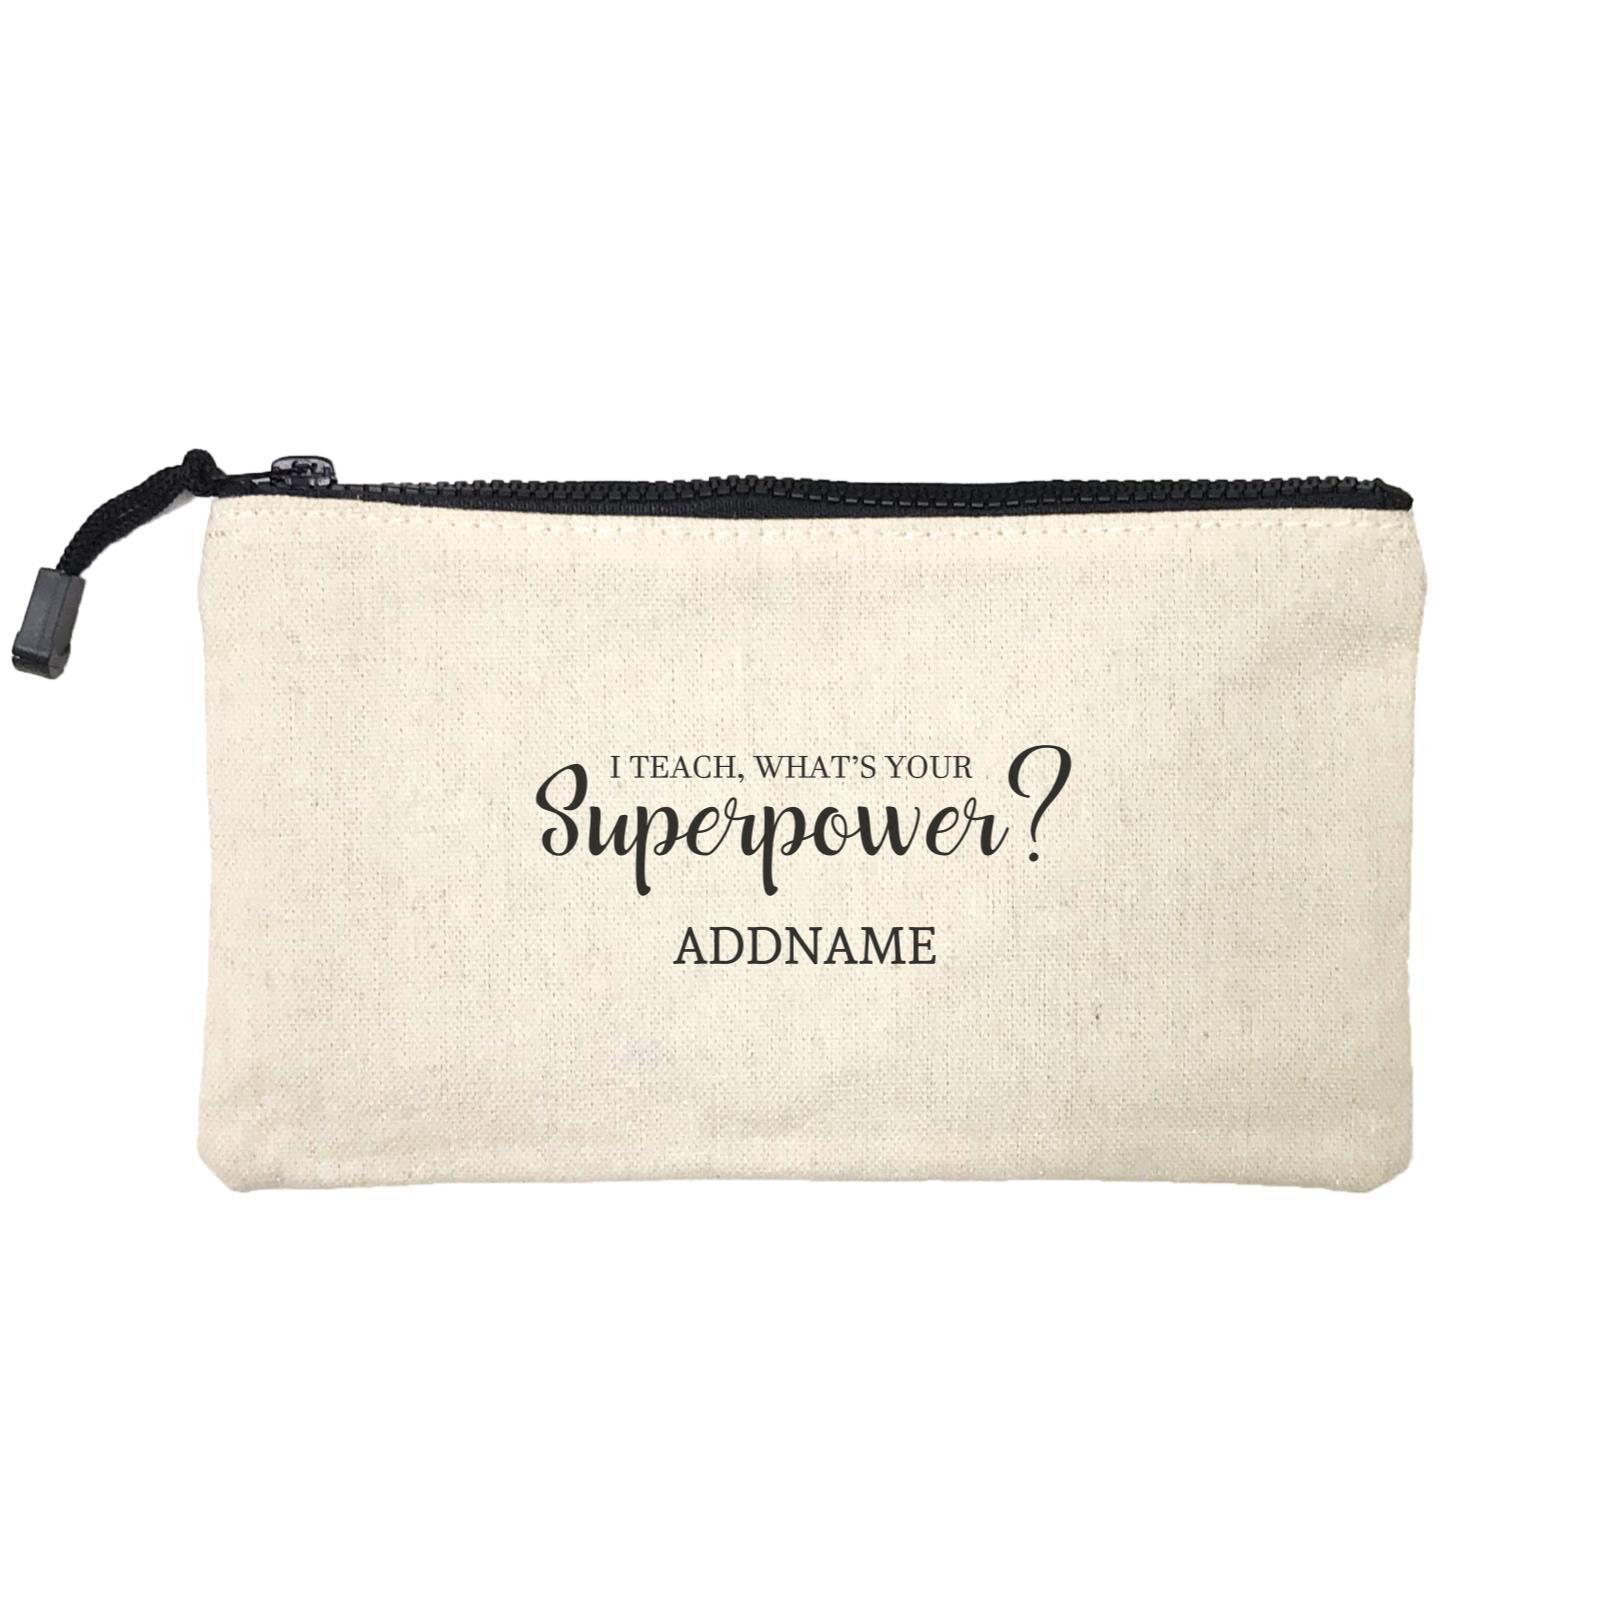 Super Teachers I Teach What's Your Superpower Addname Mini Accessories Stationery Pouch